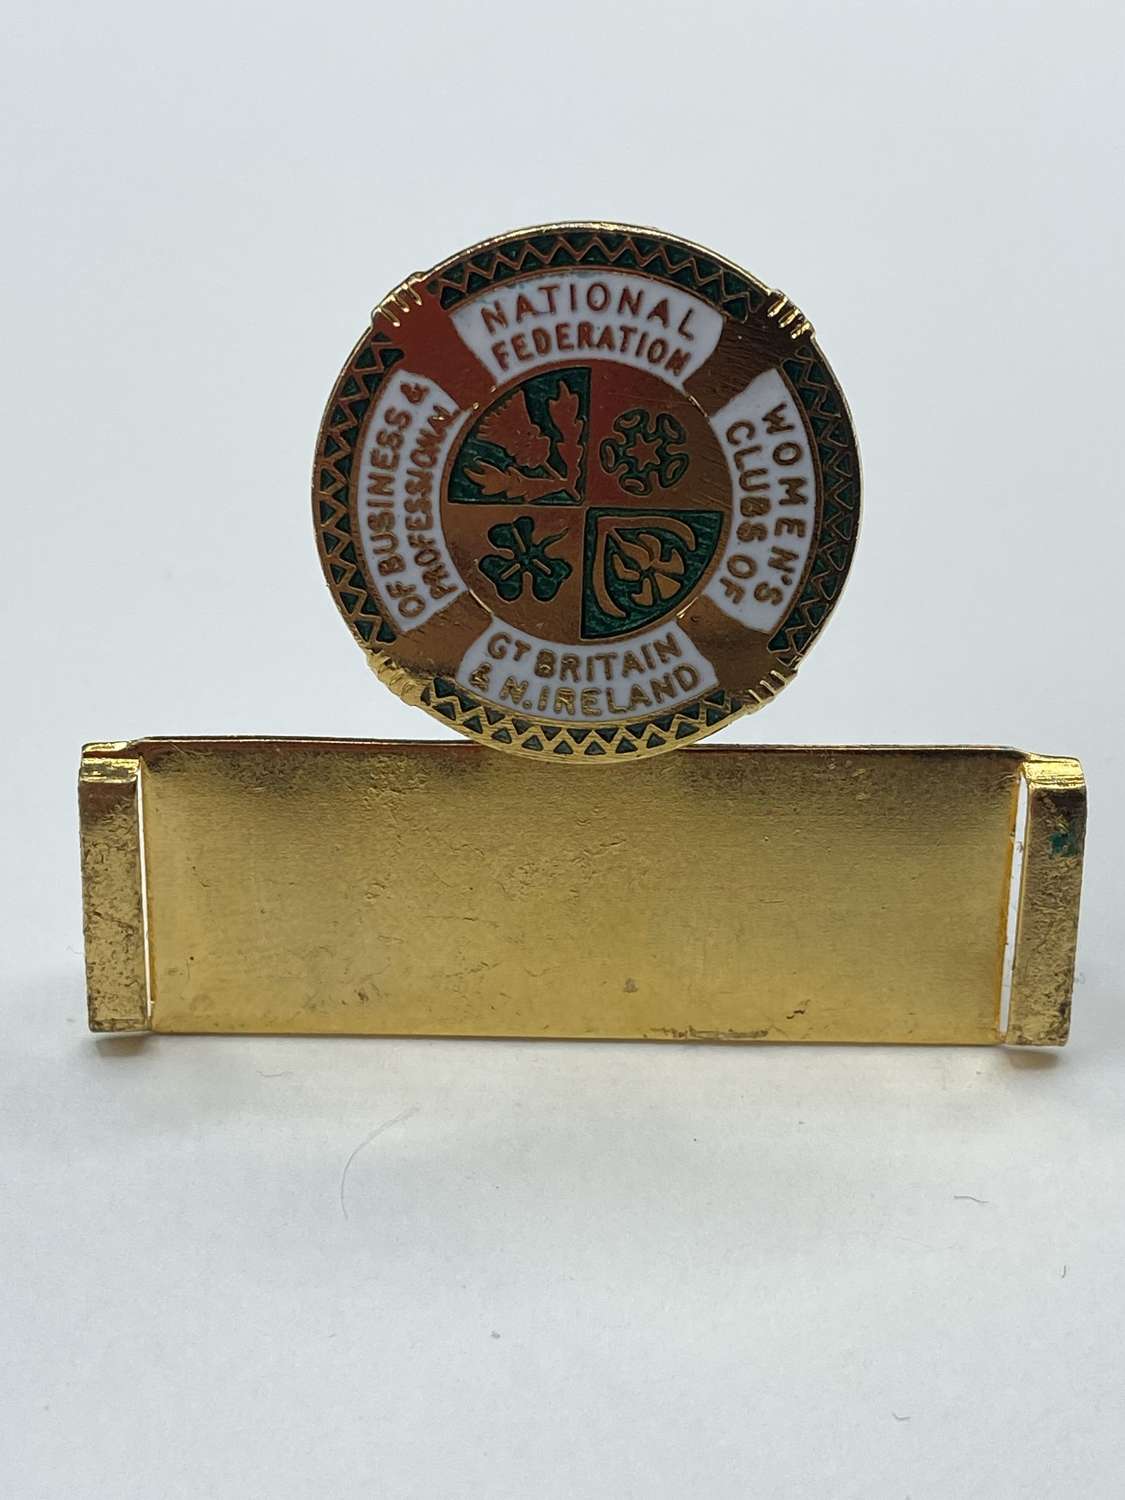 National Federation of Business & Professional Women's Clubs Badge